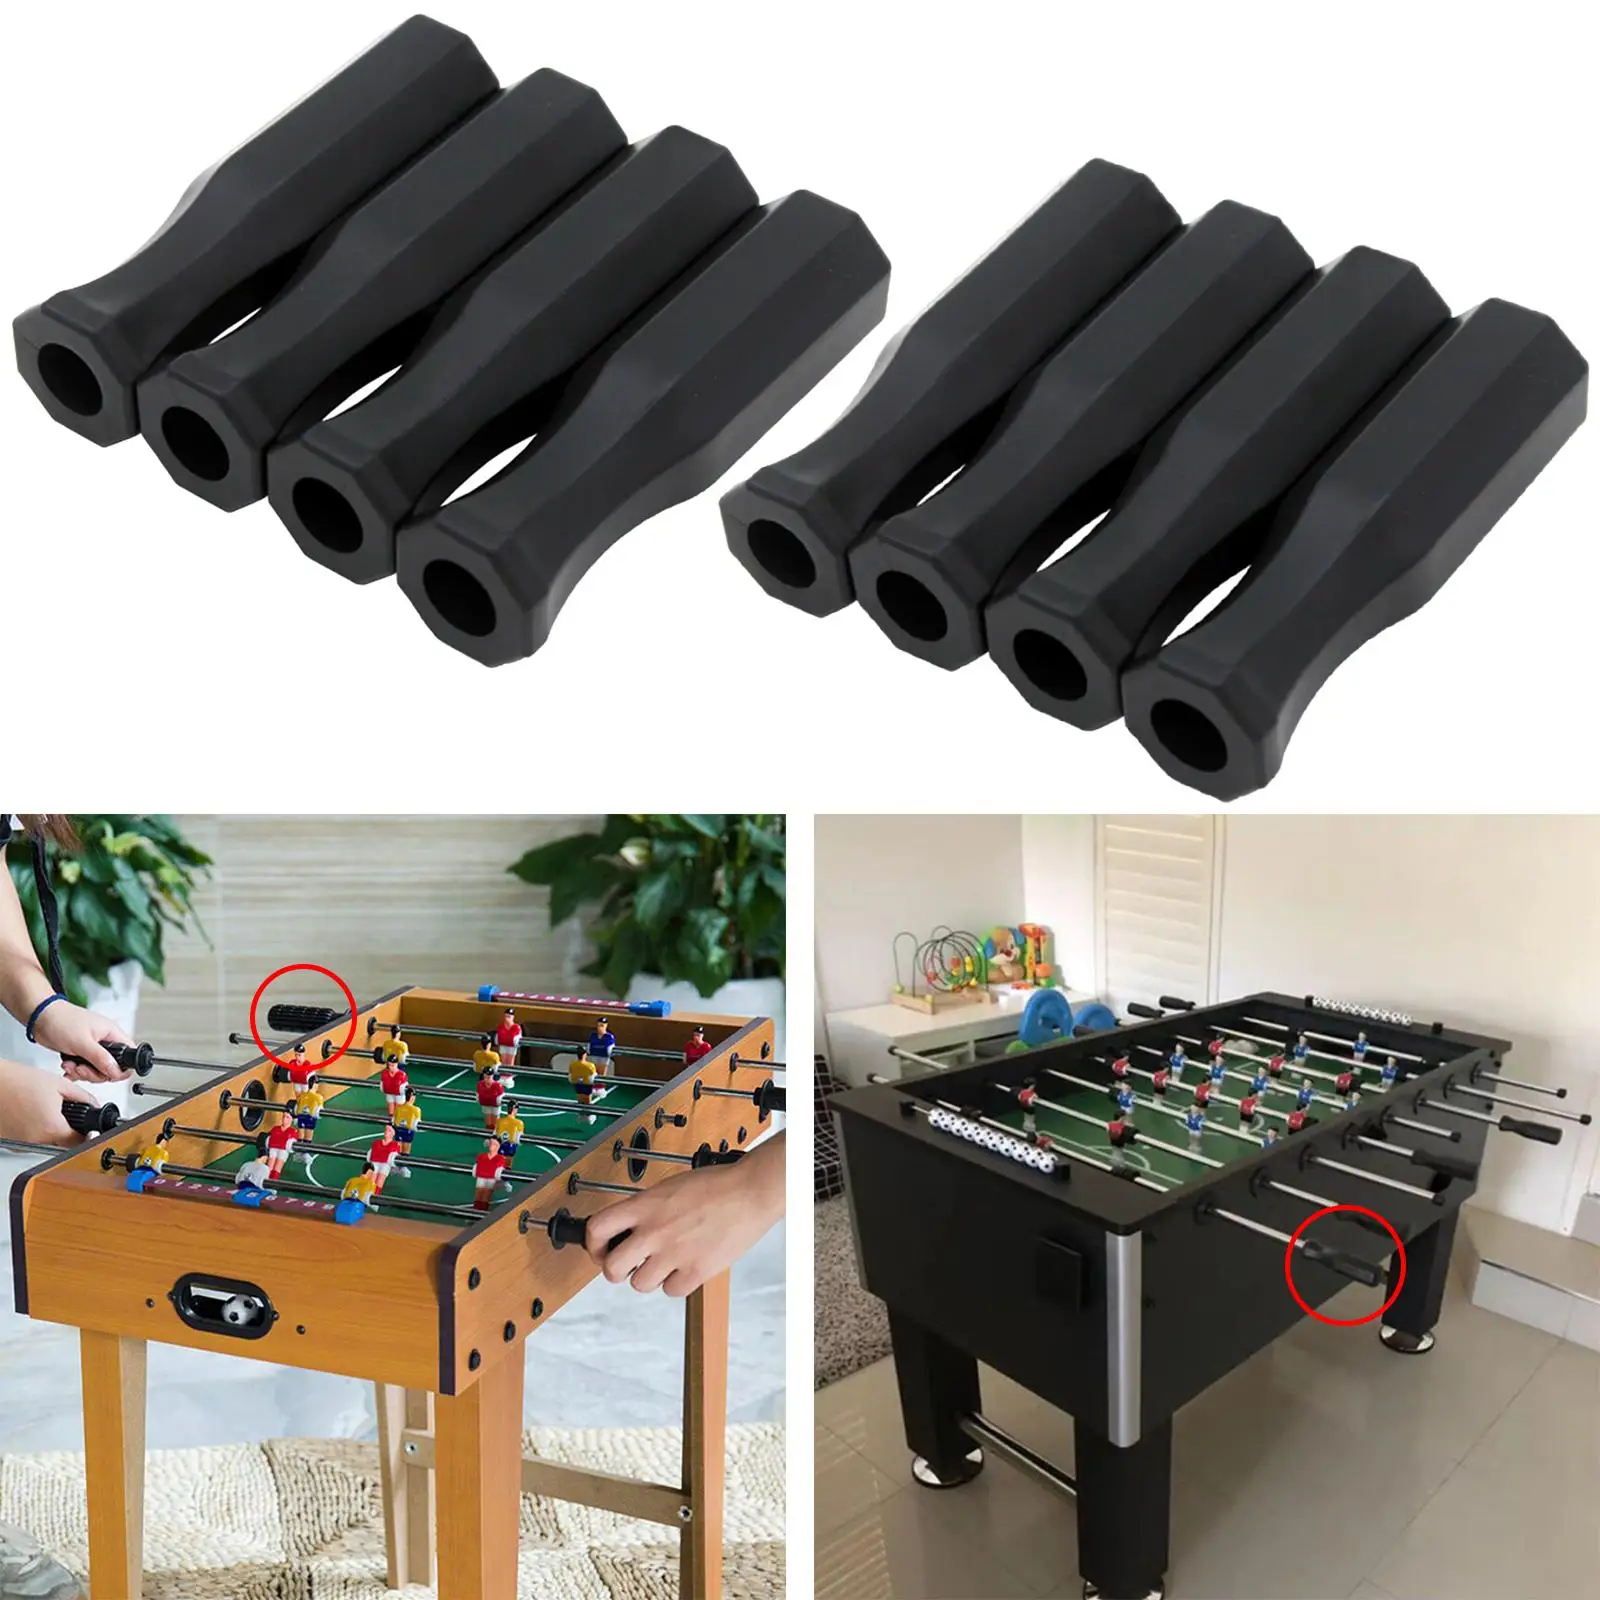 Foosball Handle Grips for Foosball Table, Table Soccer Foosball Accessories for 5/8 Inch Foosball Rods, 8 Pack